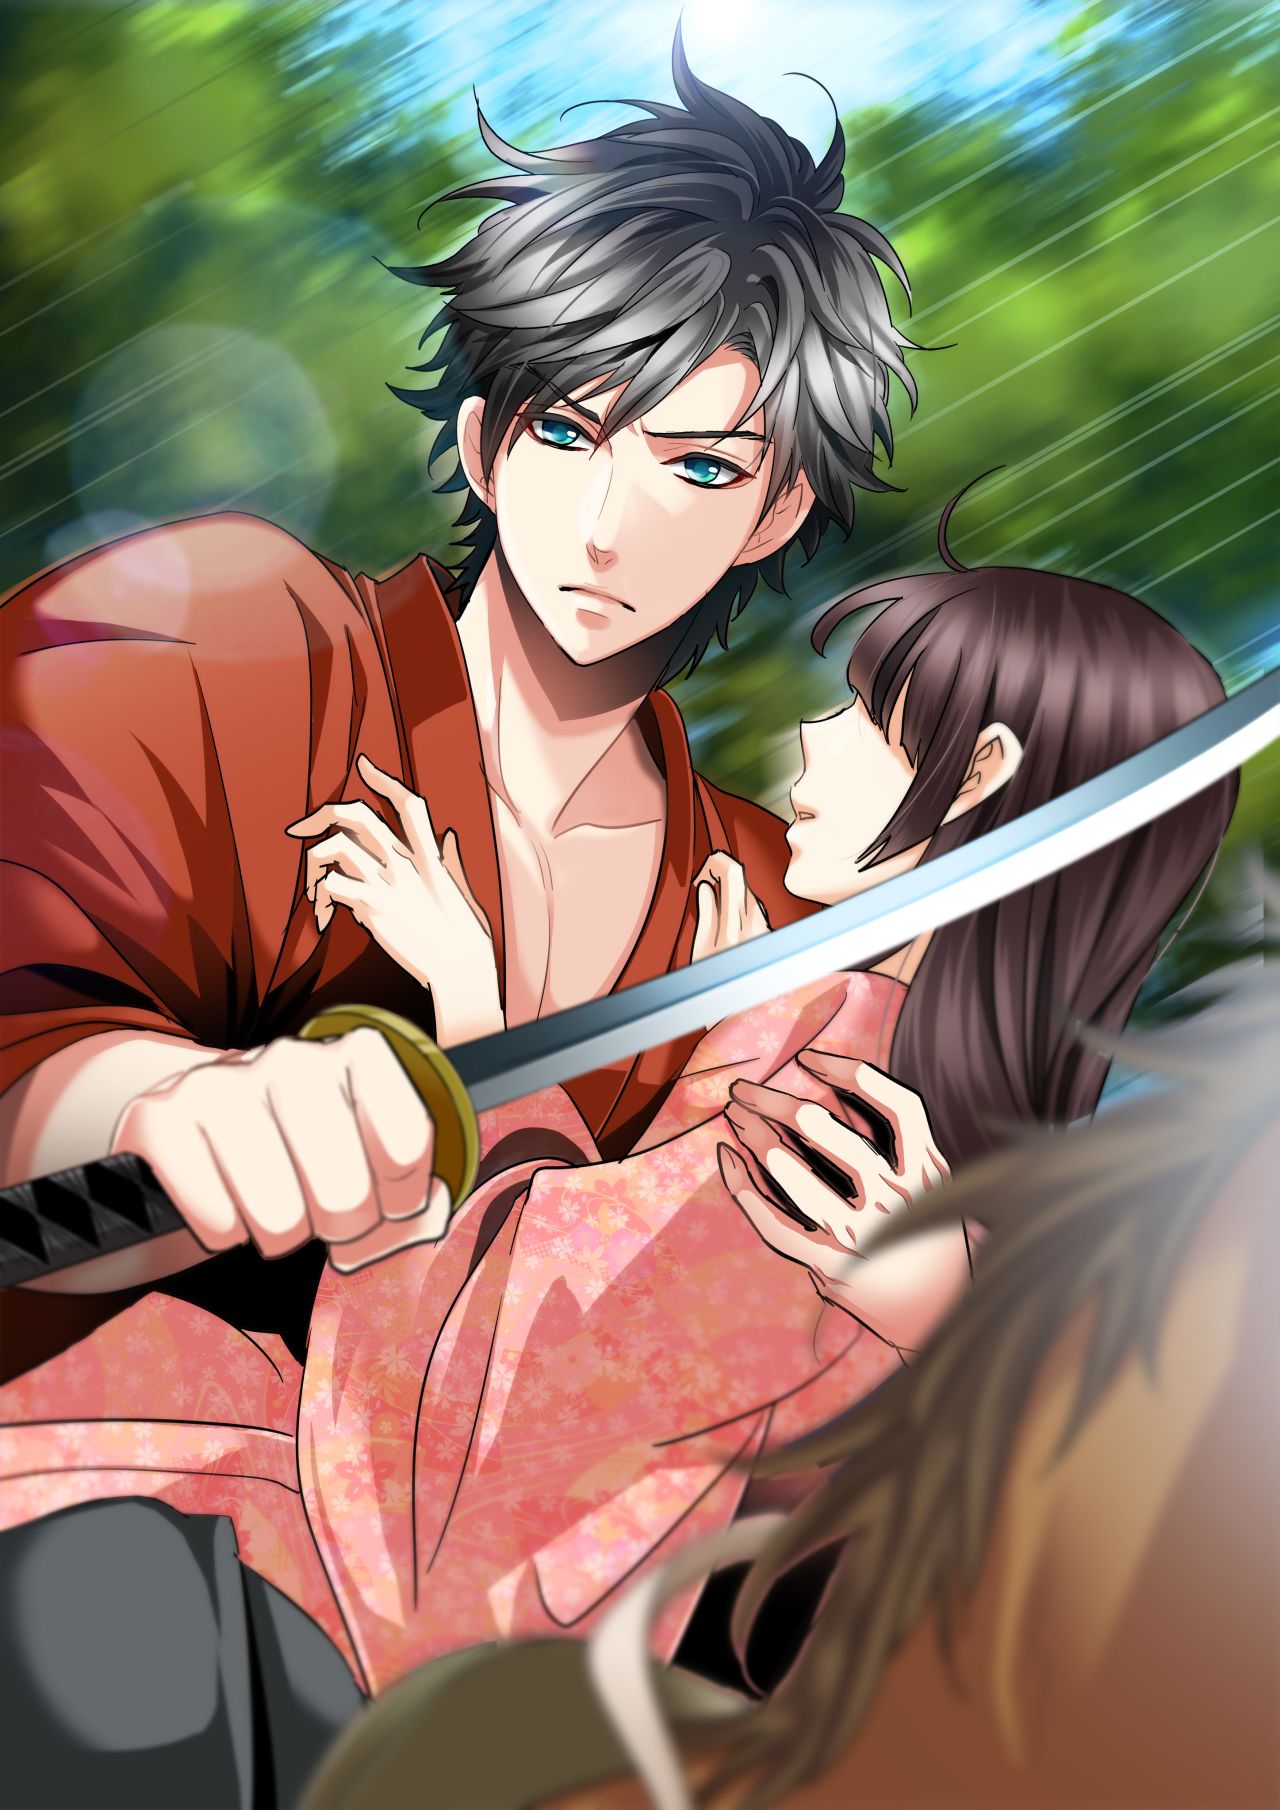 Set in the tumultuous Sengoku era, the app follows the daughter of a restaurant owner, who loses her family, on her quest for love and peace.